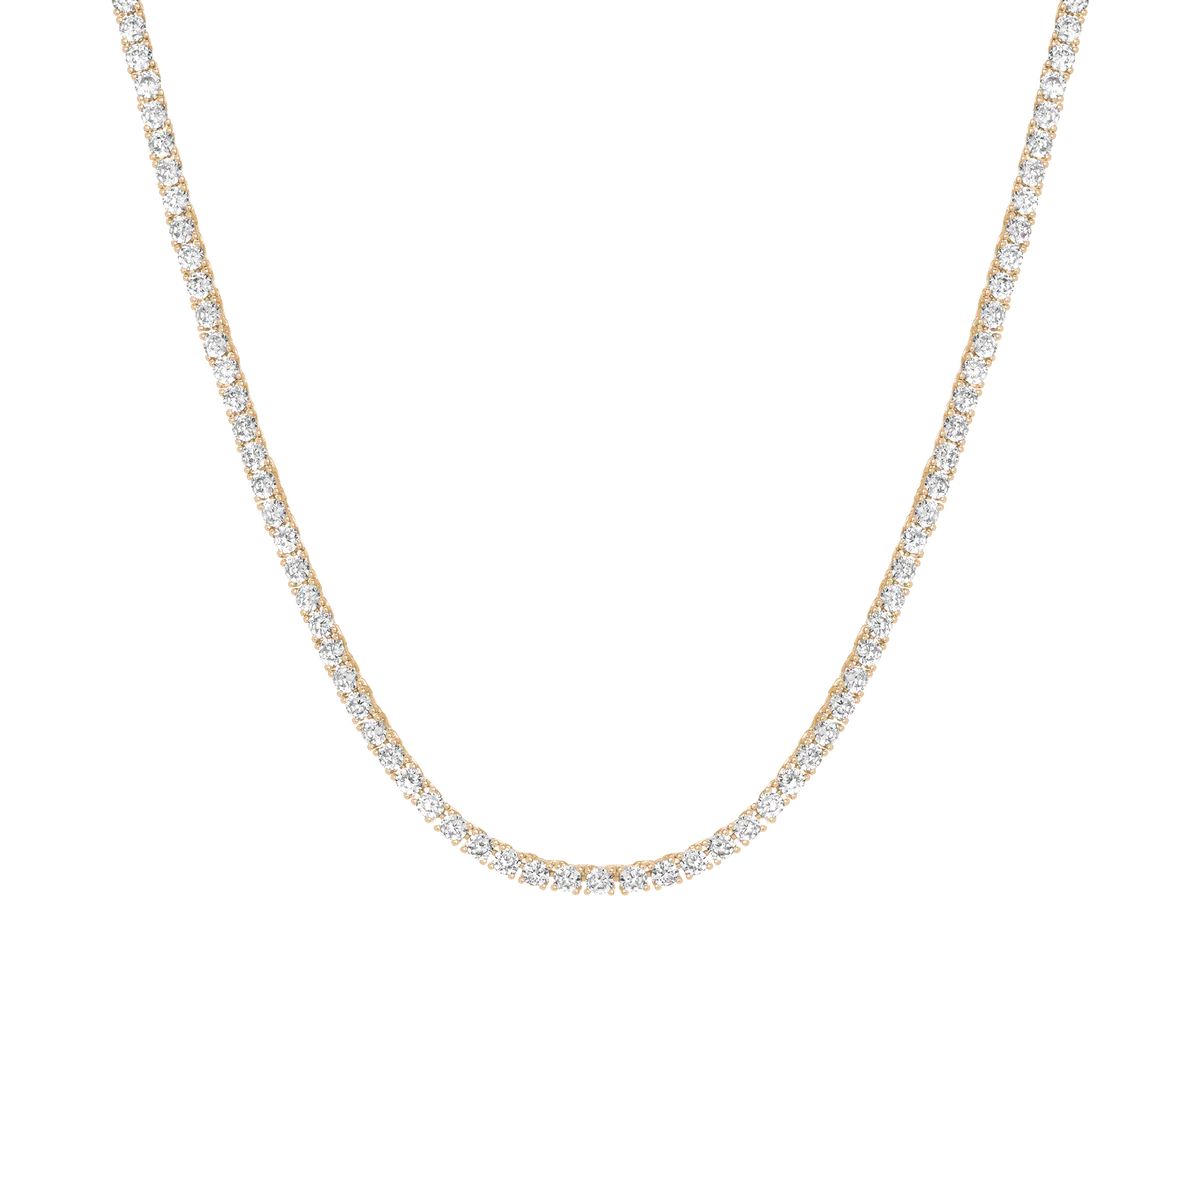 White Sapphire Tennis Necklace | AUrate New York